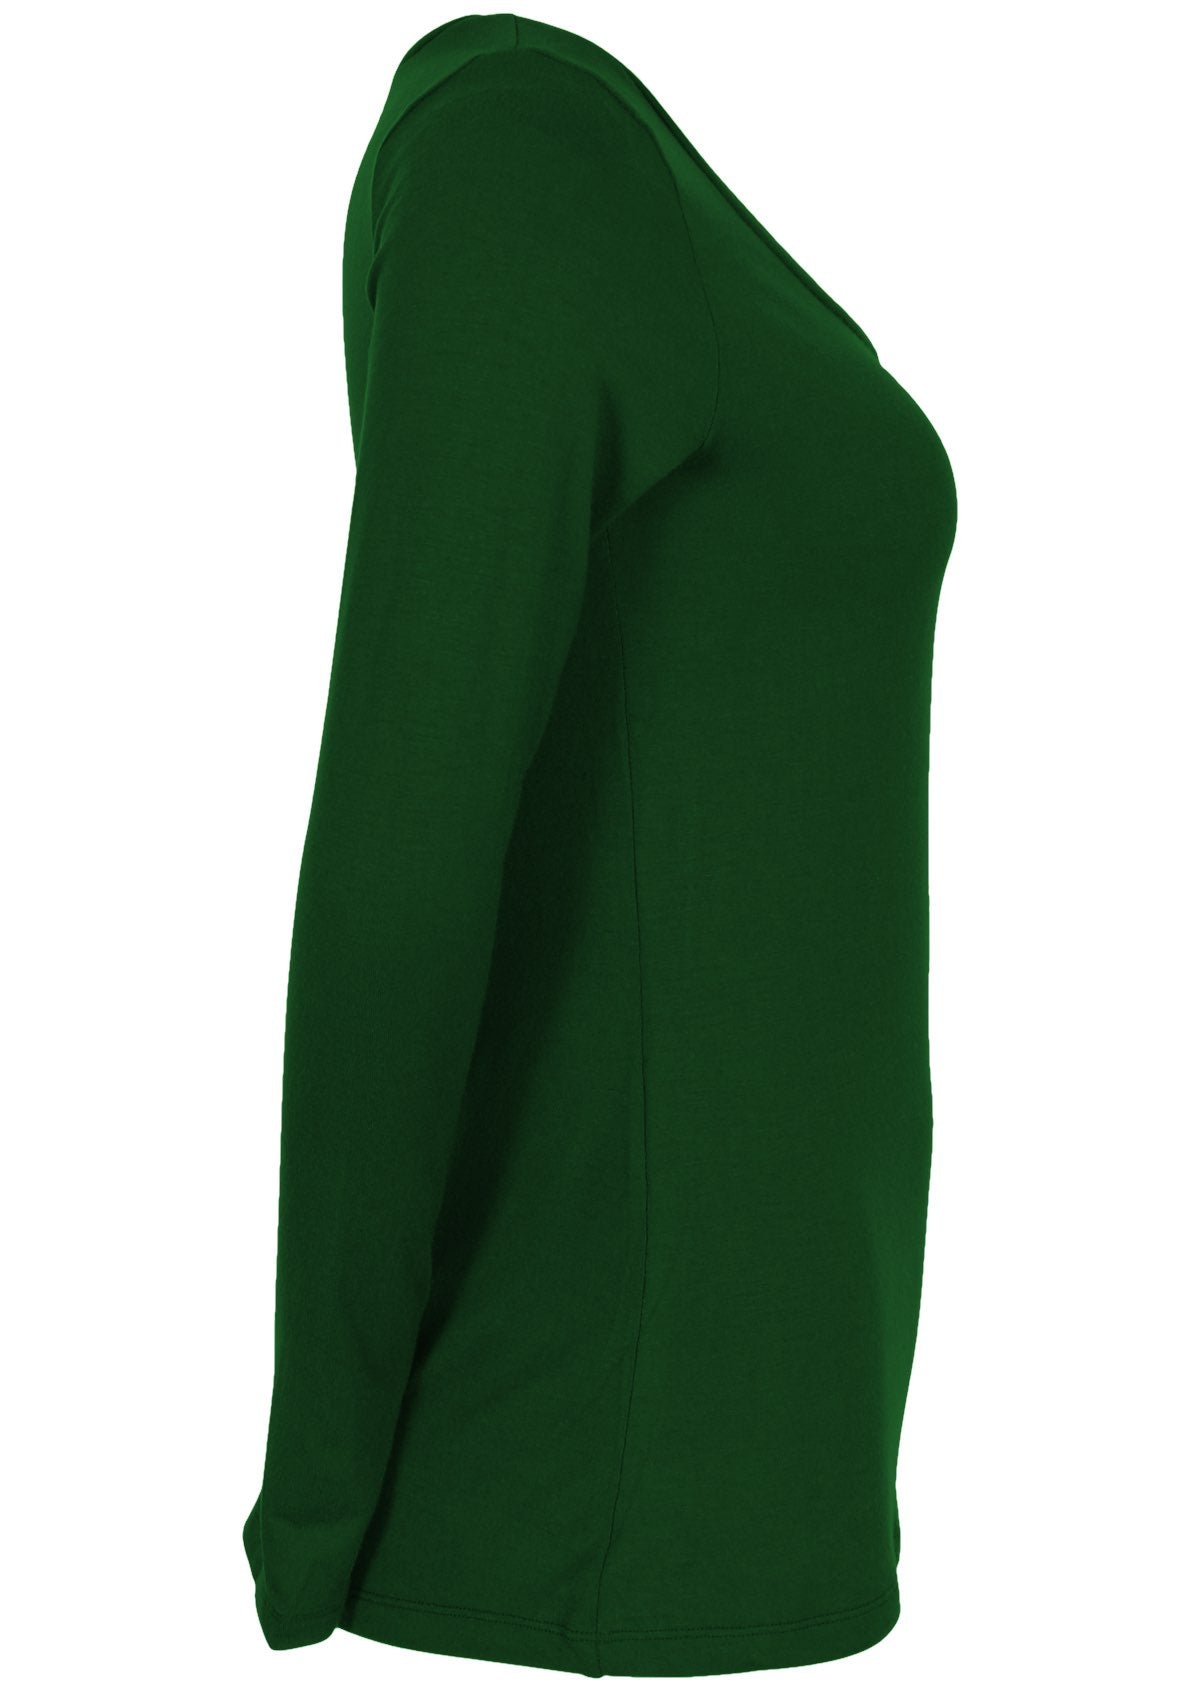 Side view of women's green long sleeve stretch v-neck soft rayon top.